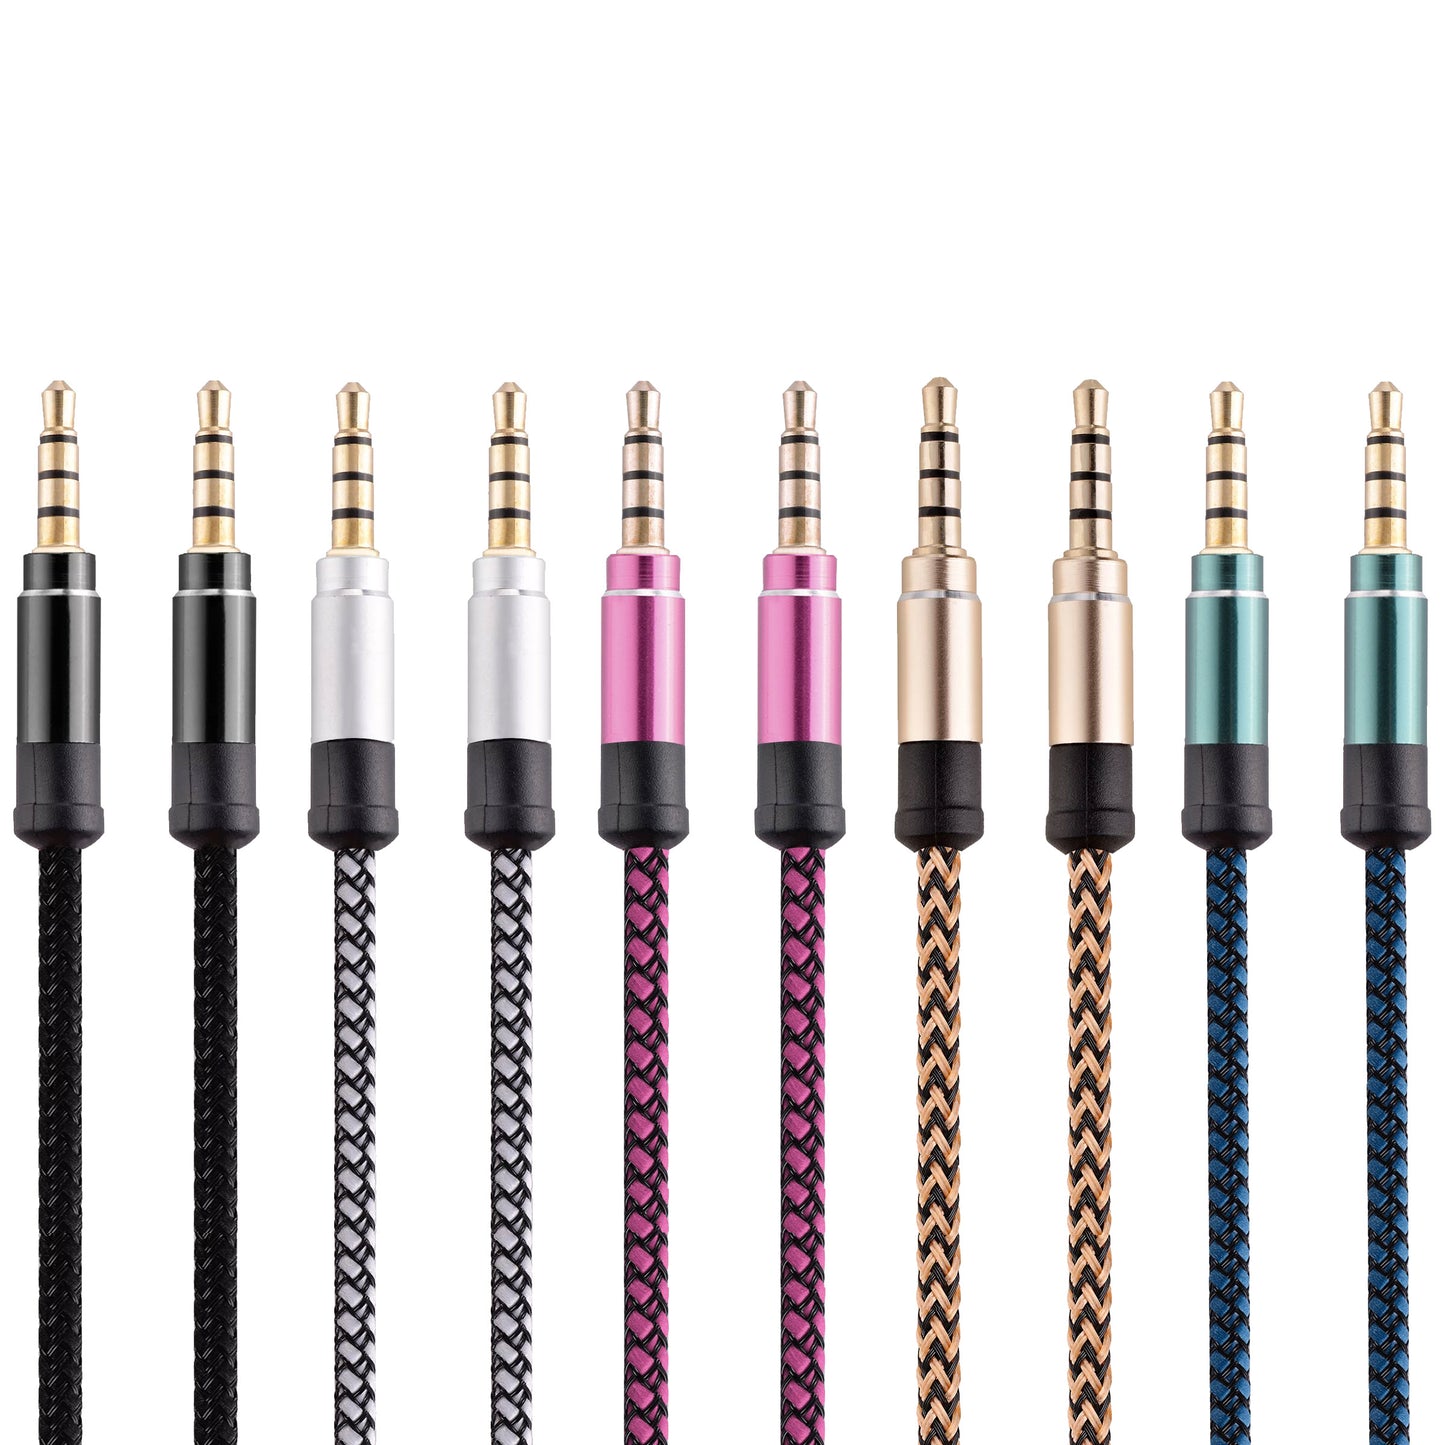 [MOTTO] Braided Audio Cable 3FT